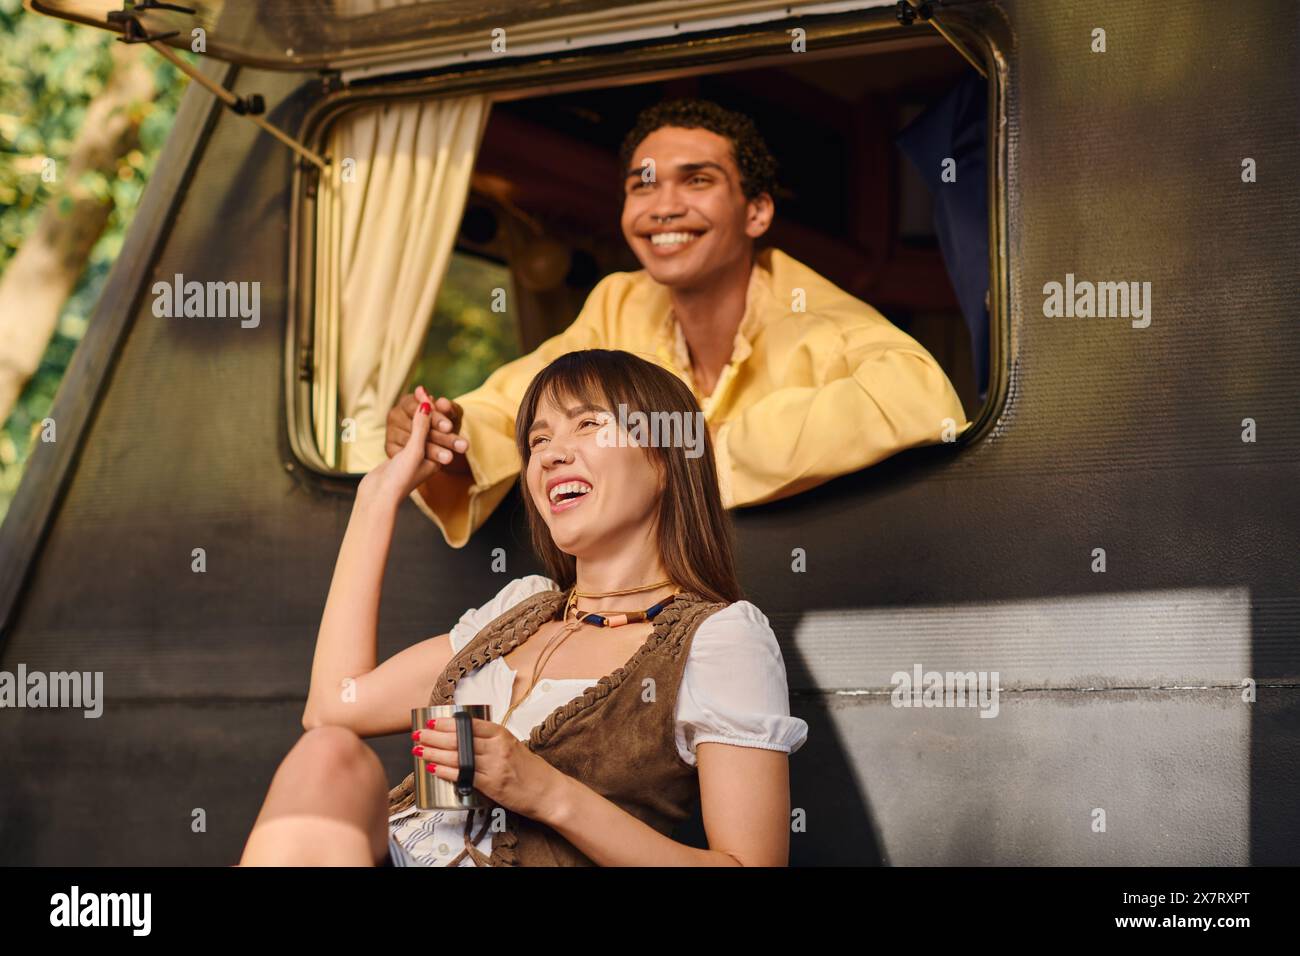 A man and a woman are peacefully seated together on a van, gazing out the window as they travel. Stock Photo